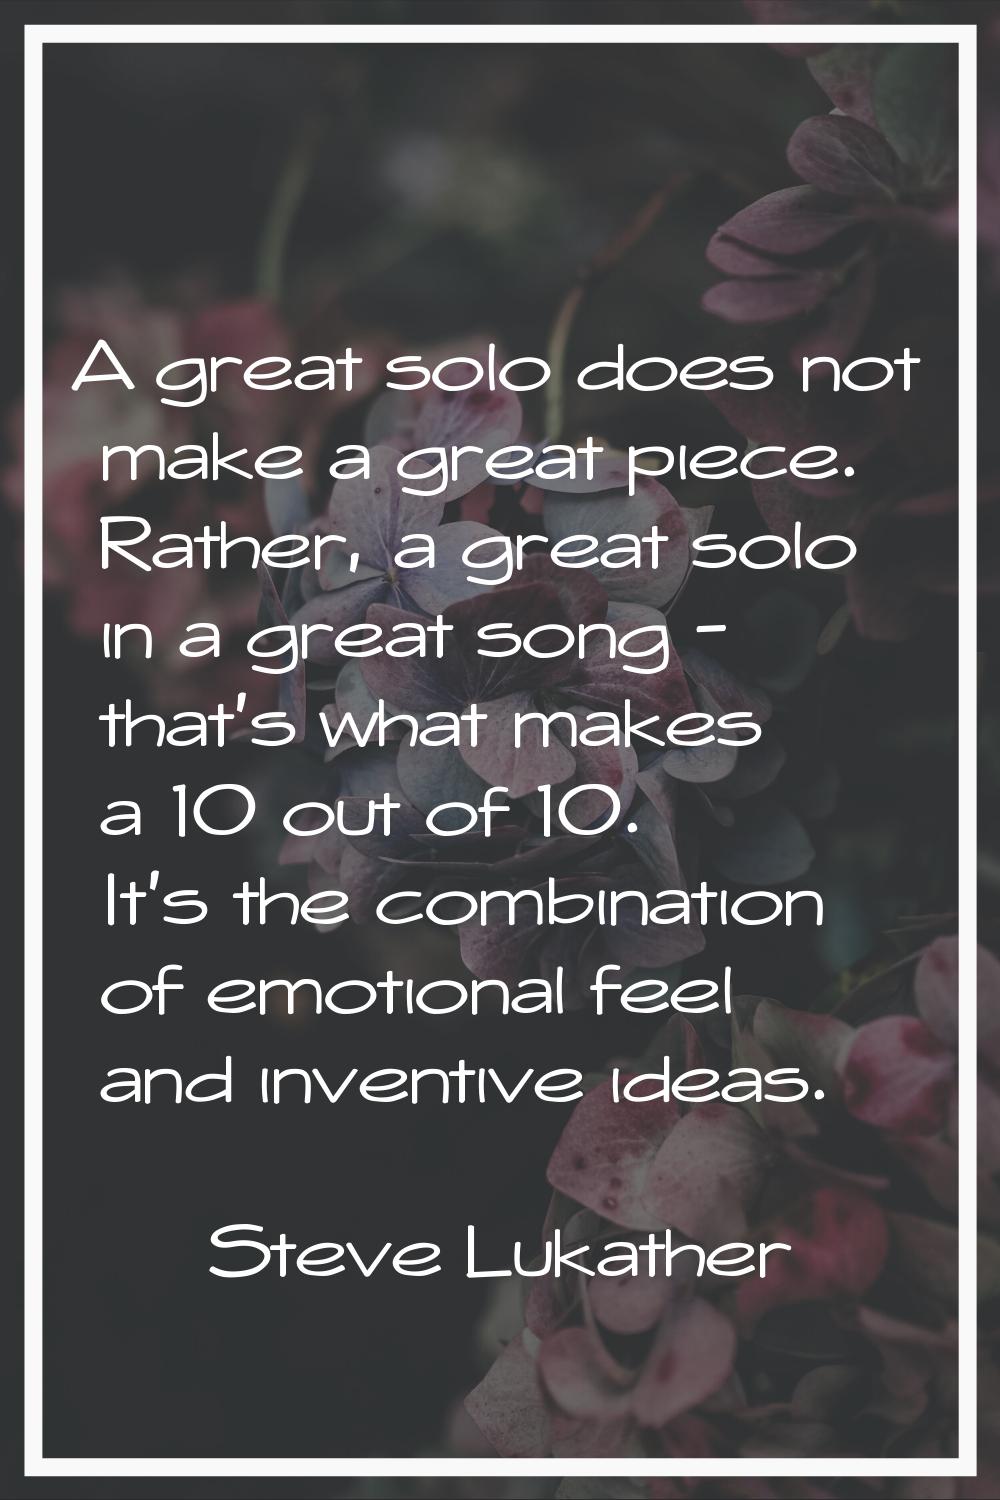 A great solo does not make a great piece. Rather, a great solo in a great song - that's what makes 